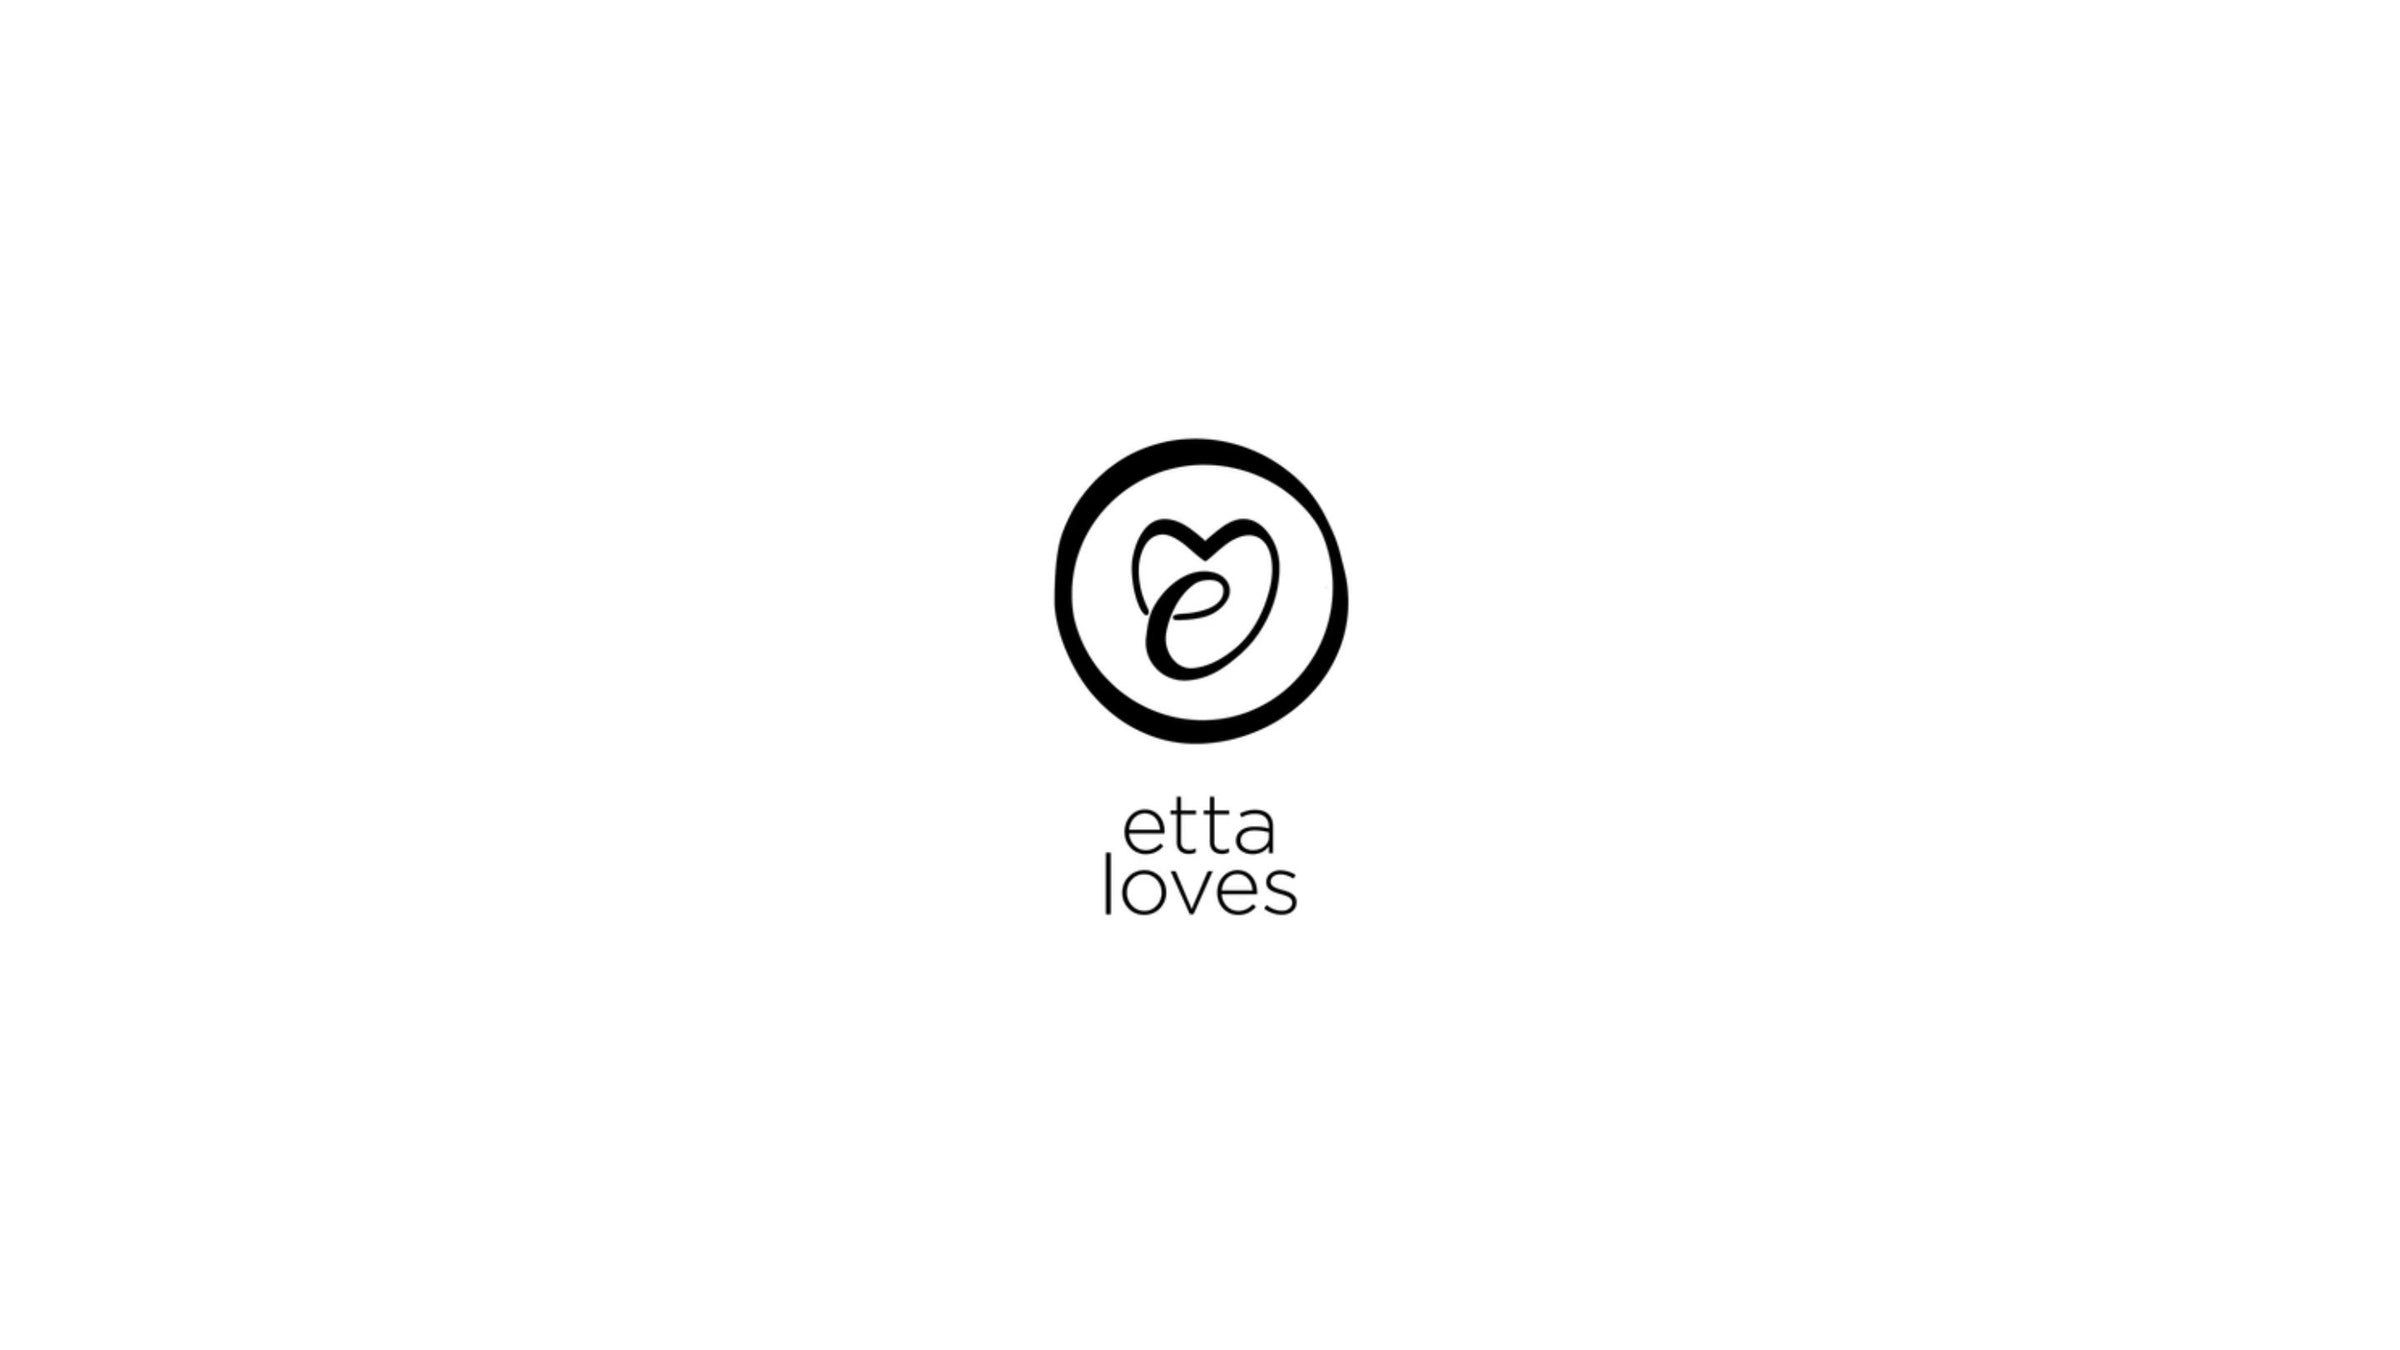 Etta Loves logo - black heart and the letter E intertwined in a circle